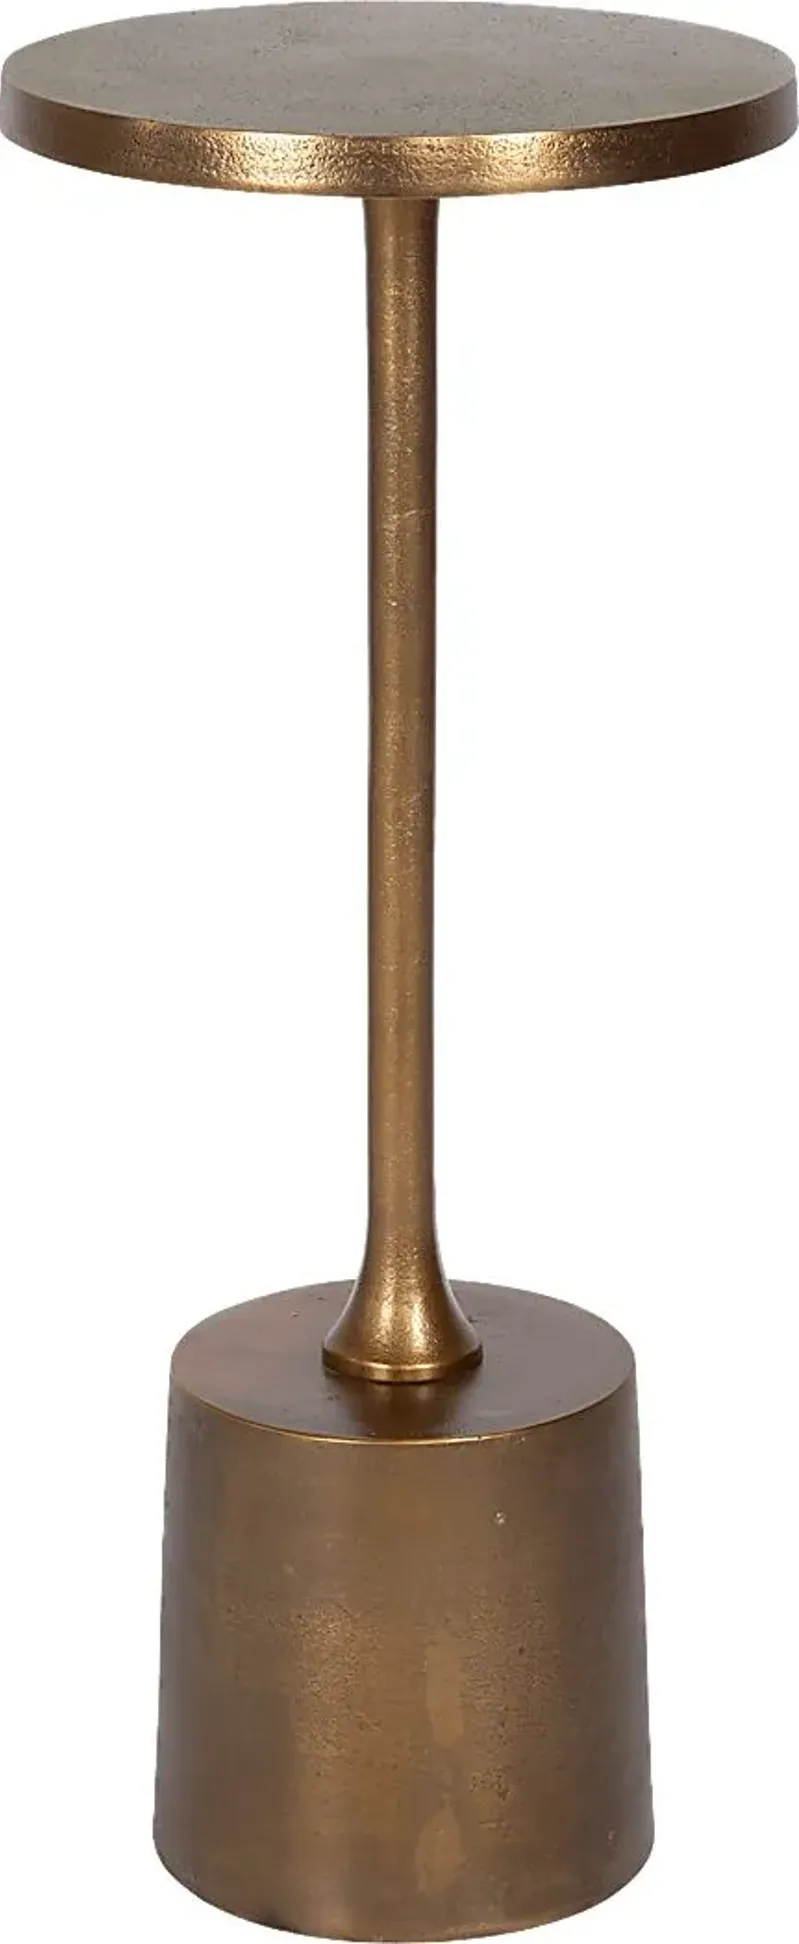 Debbinshire Brass Accent Table